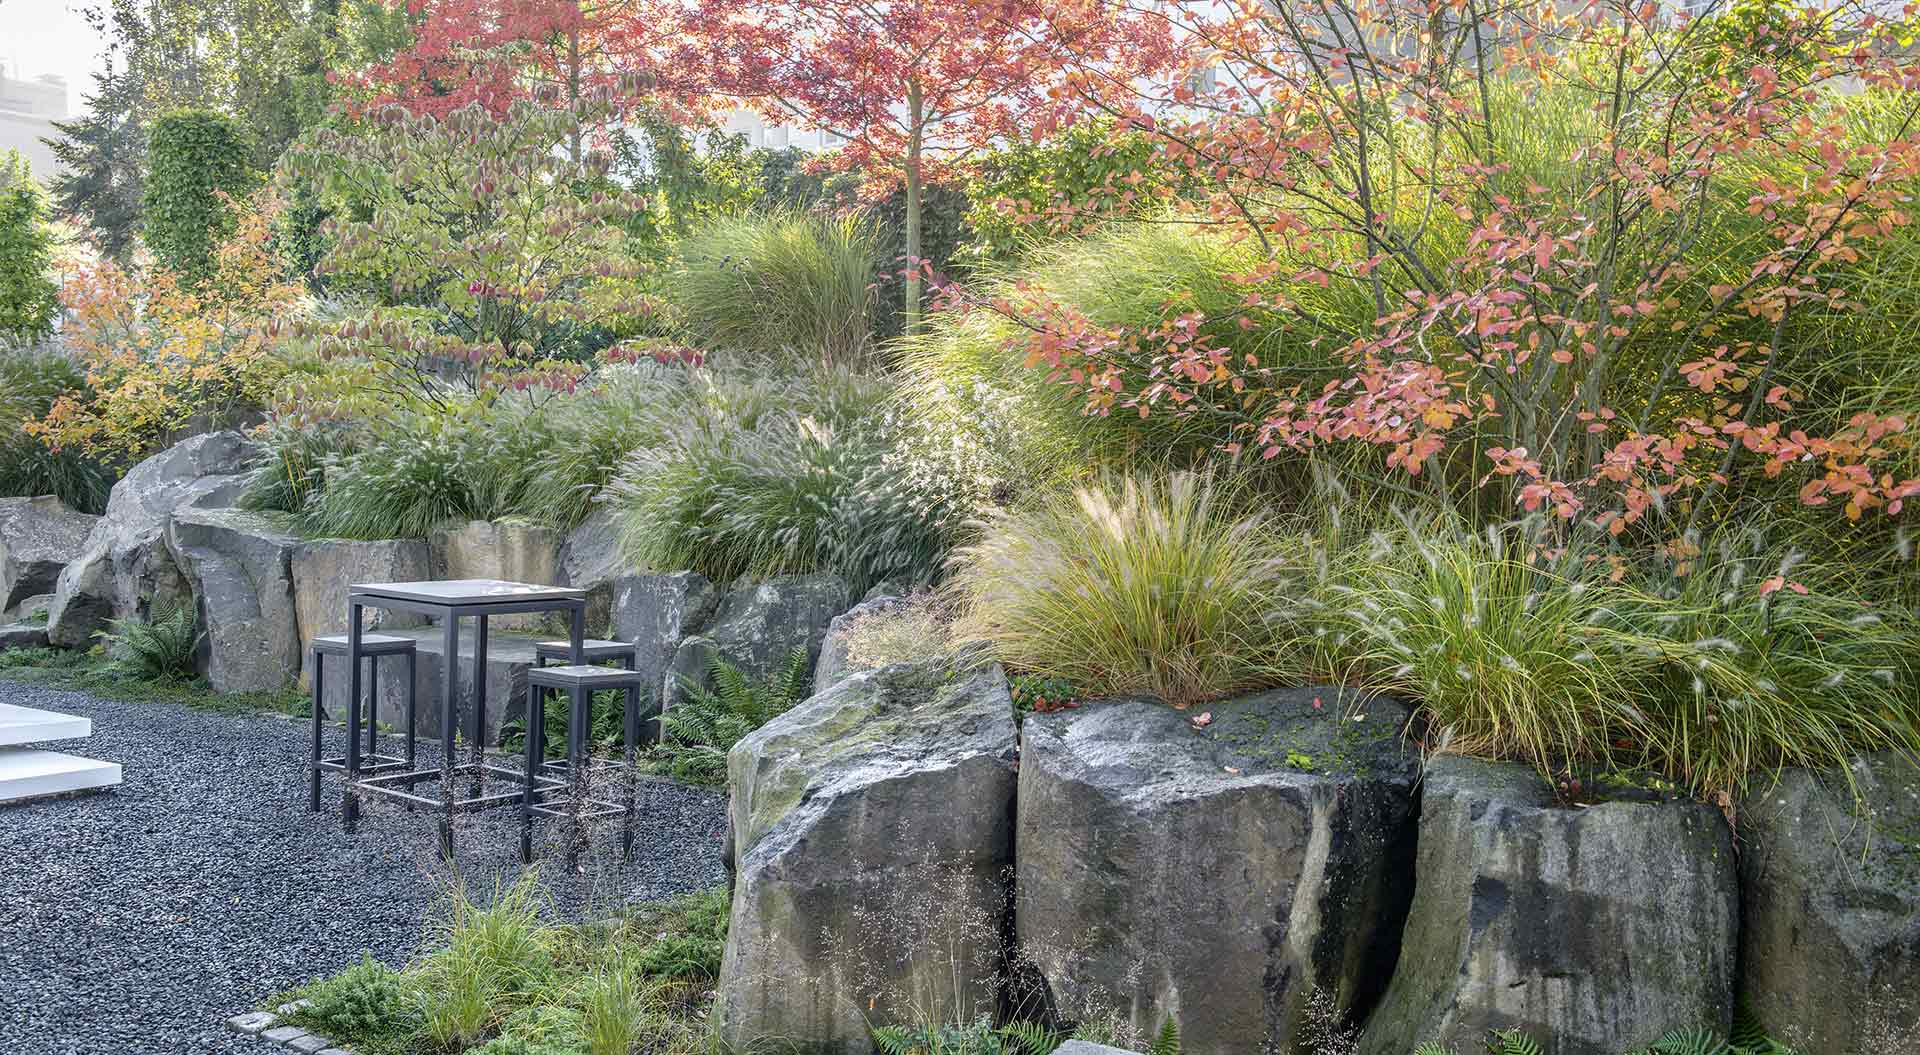 Slope garden with a big stone wall and a high amount of grasses